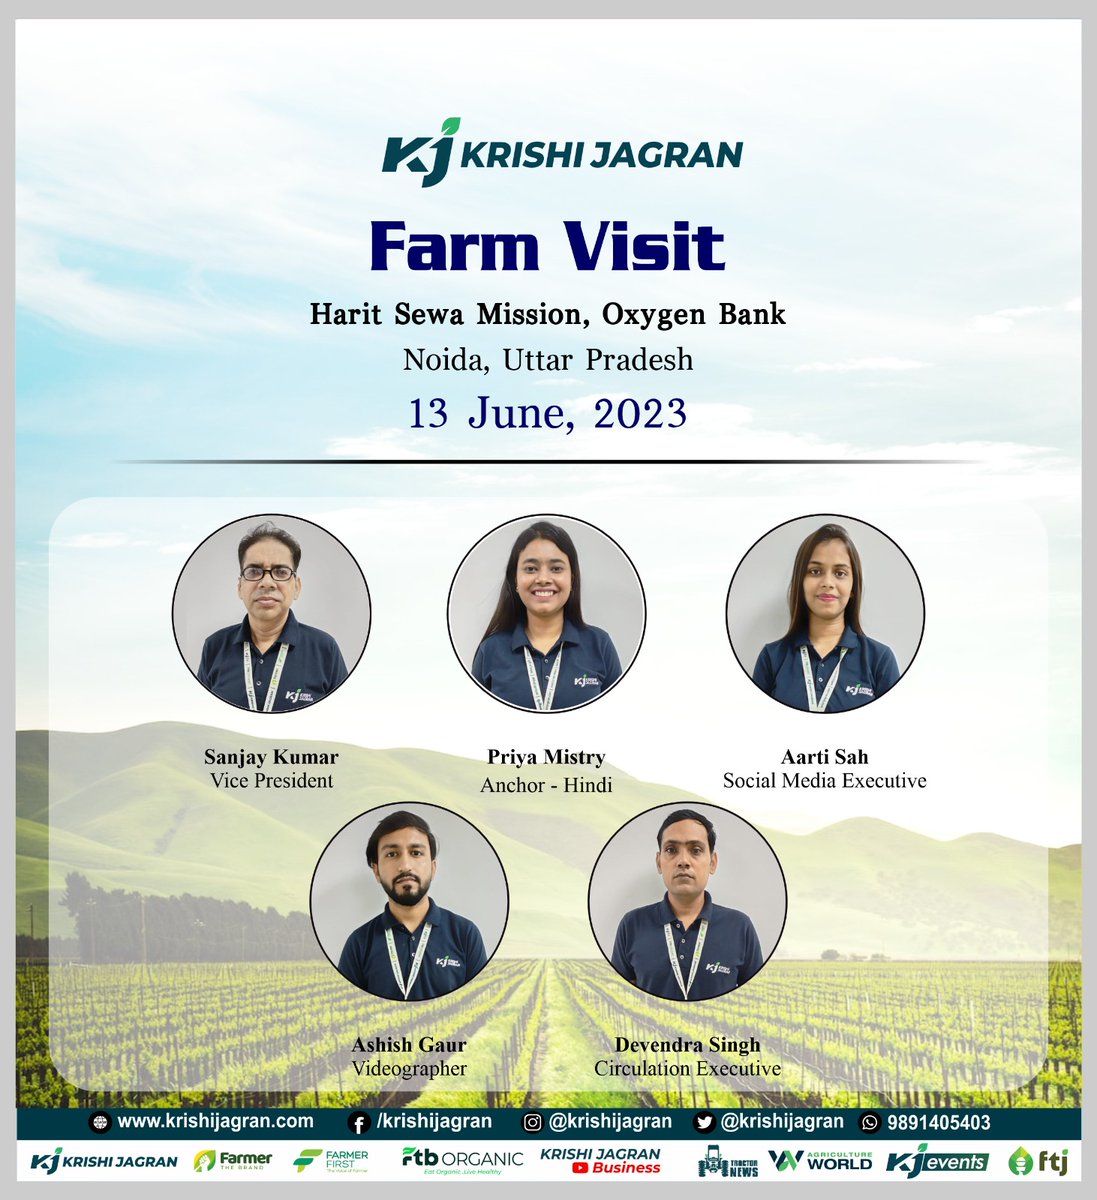 Our team attended a farm visit at Harit Sewa Mission, Oxygen Bank, Noida, Uttar Pradesh discovering the hidden treasures of sustainable agriculture and exploring the bountiful harvest and vibrant landscapes.

#haritsewamission #oxygenbank #krishijagran #agriculture #harvesting